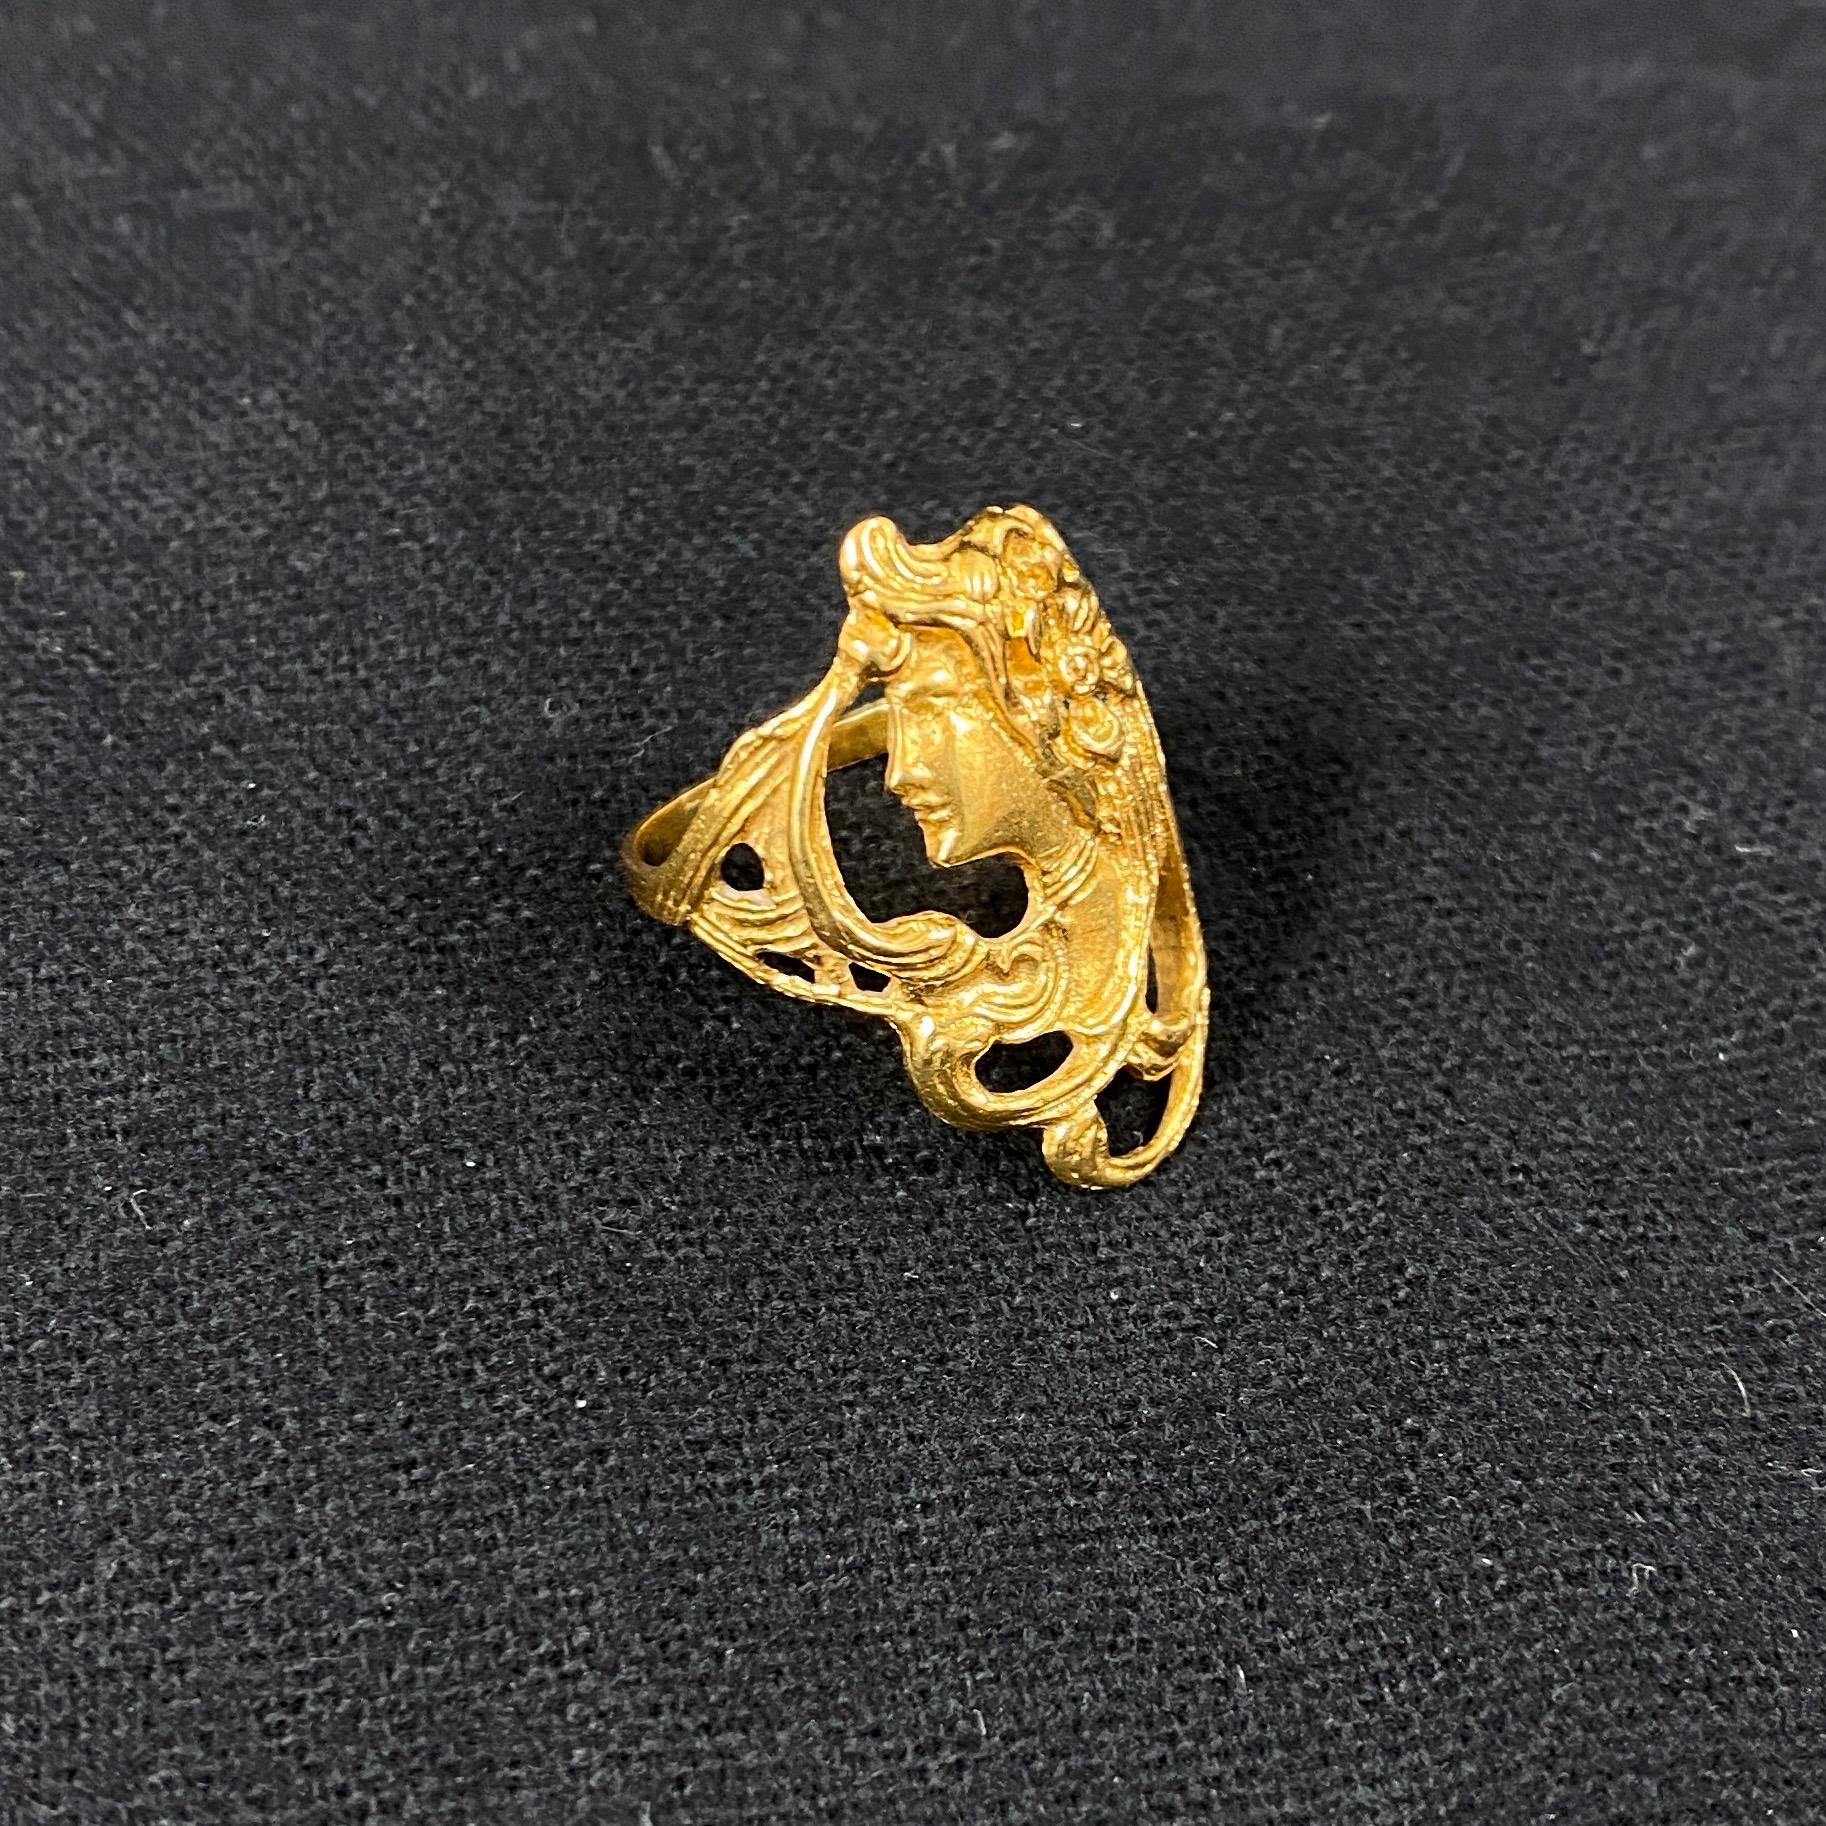 Vintage 1980s Art Nouveau Style Female Figure Openwork Ring Yellow Gold Signed 10